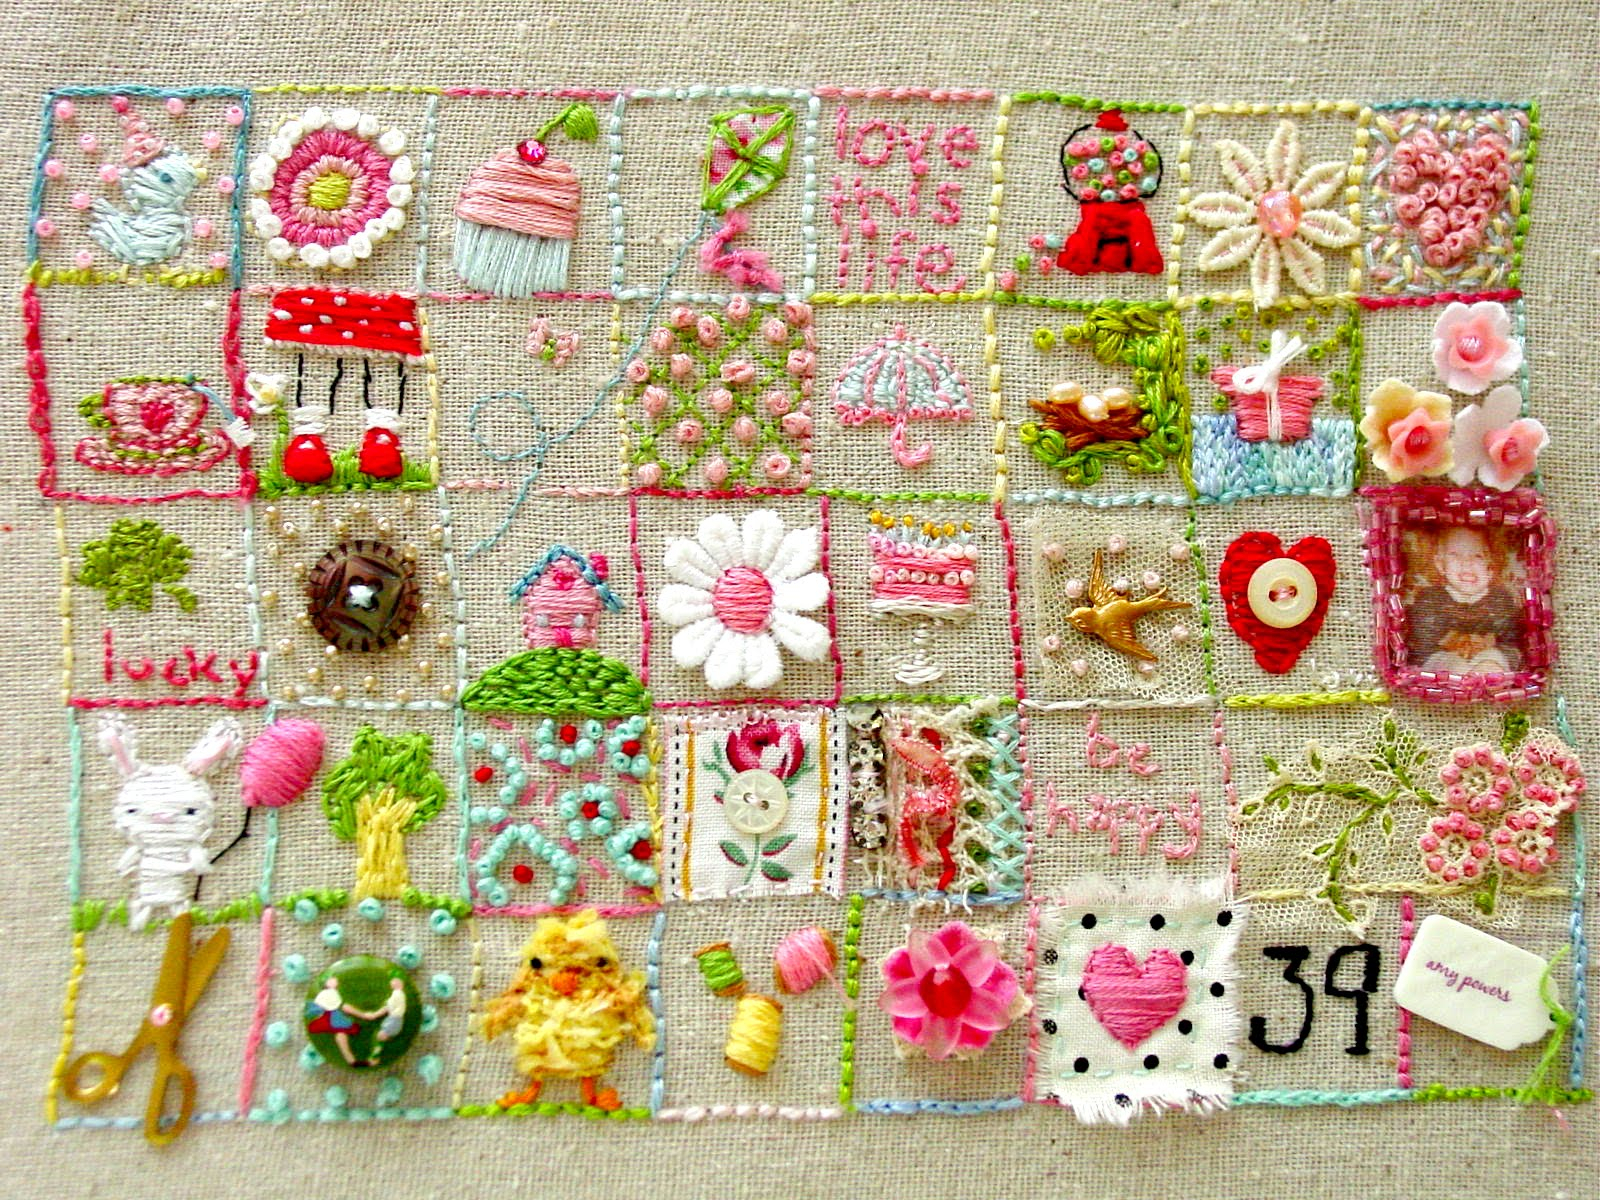 Embroidery Sampler Patterns Free Cross Stitch Embroidery Free Patterns Craftforest